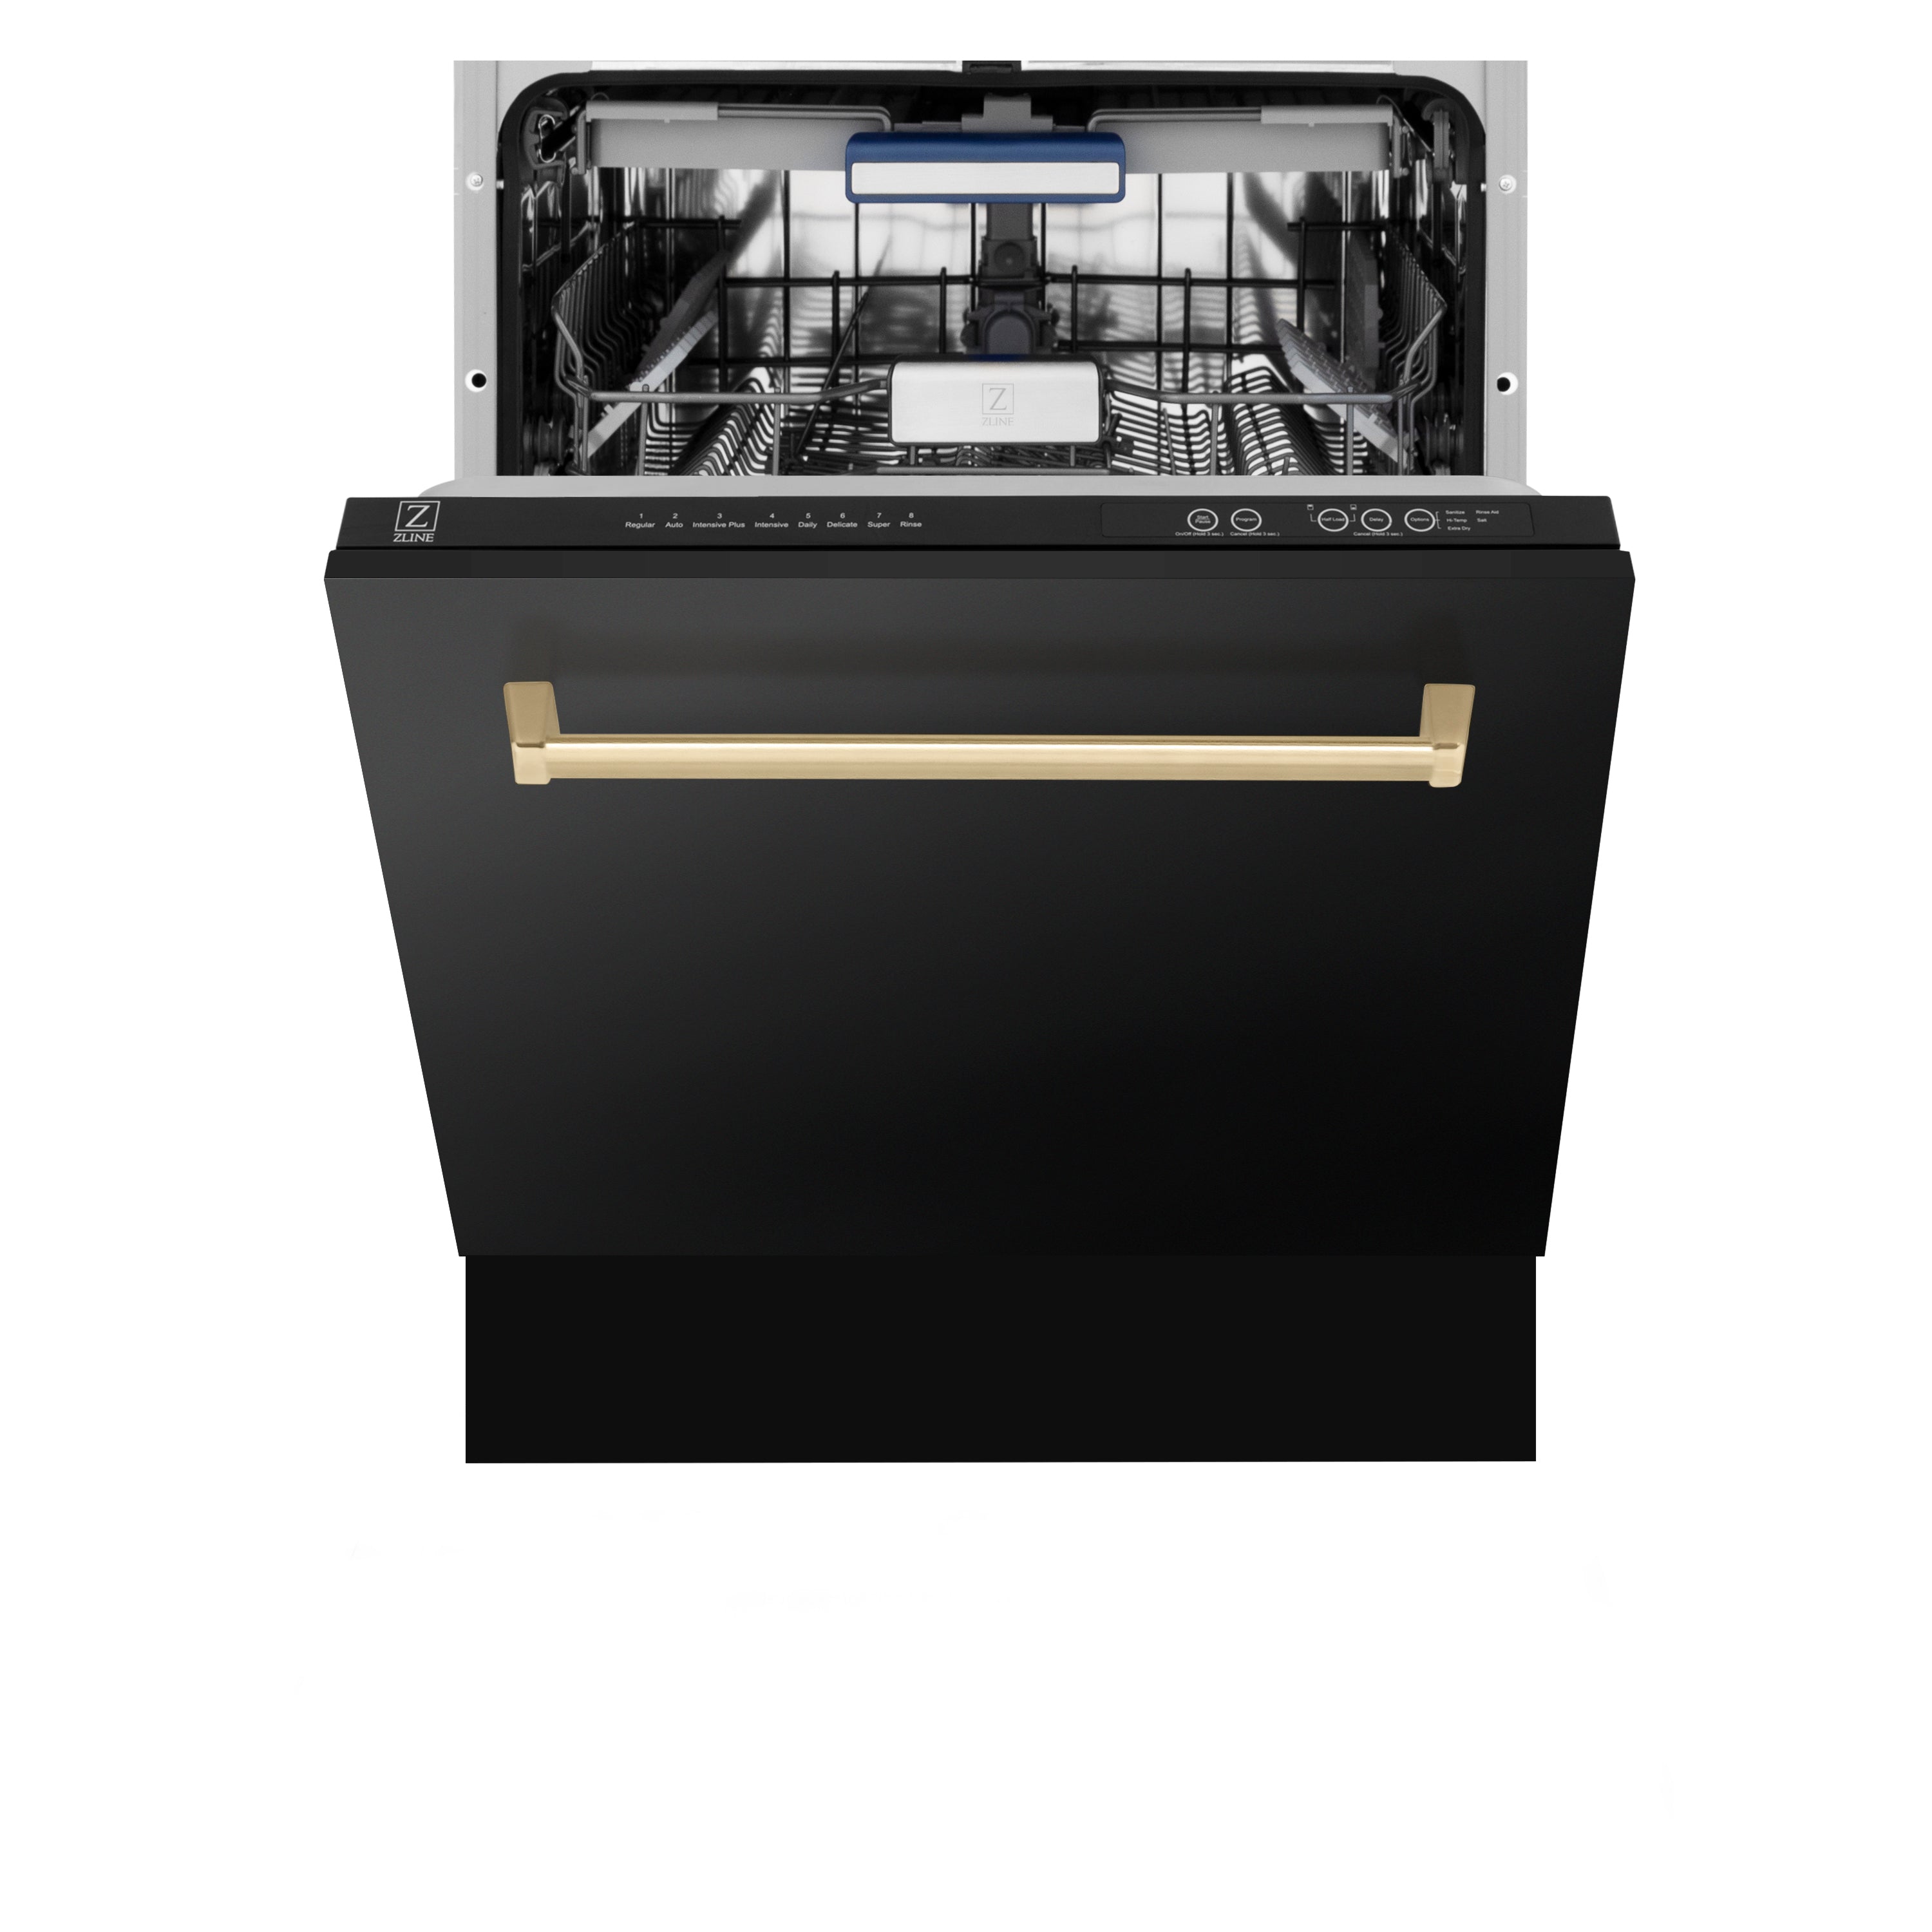 ZLINE Autograph Edition 24 in. Tall Tub Dishwasher in Black Stainless Steel with Champagne Bronze Accent Handle (DWVZ-BS-24-CB) Front, Door Half Open Open.